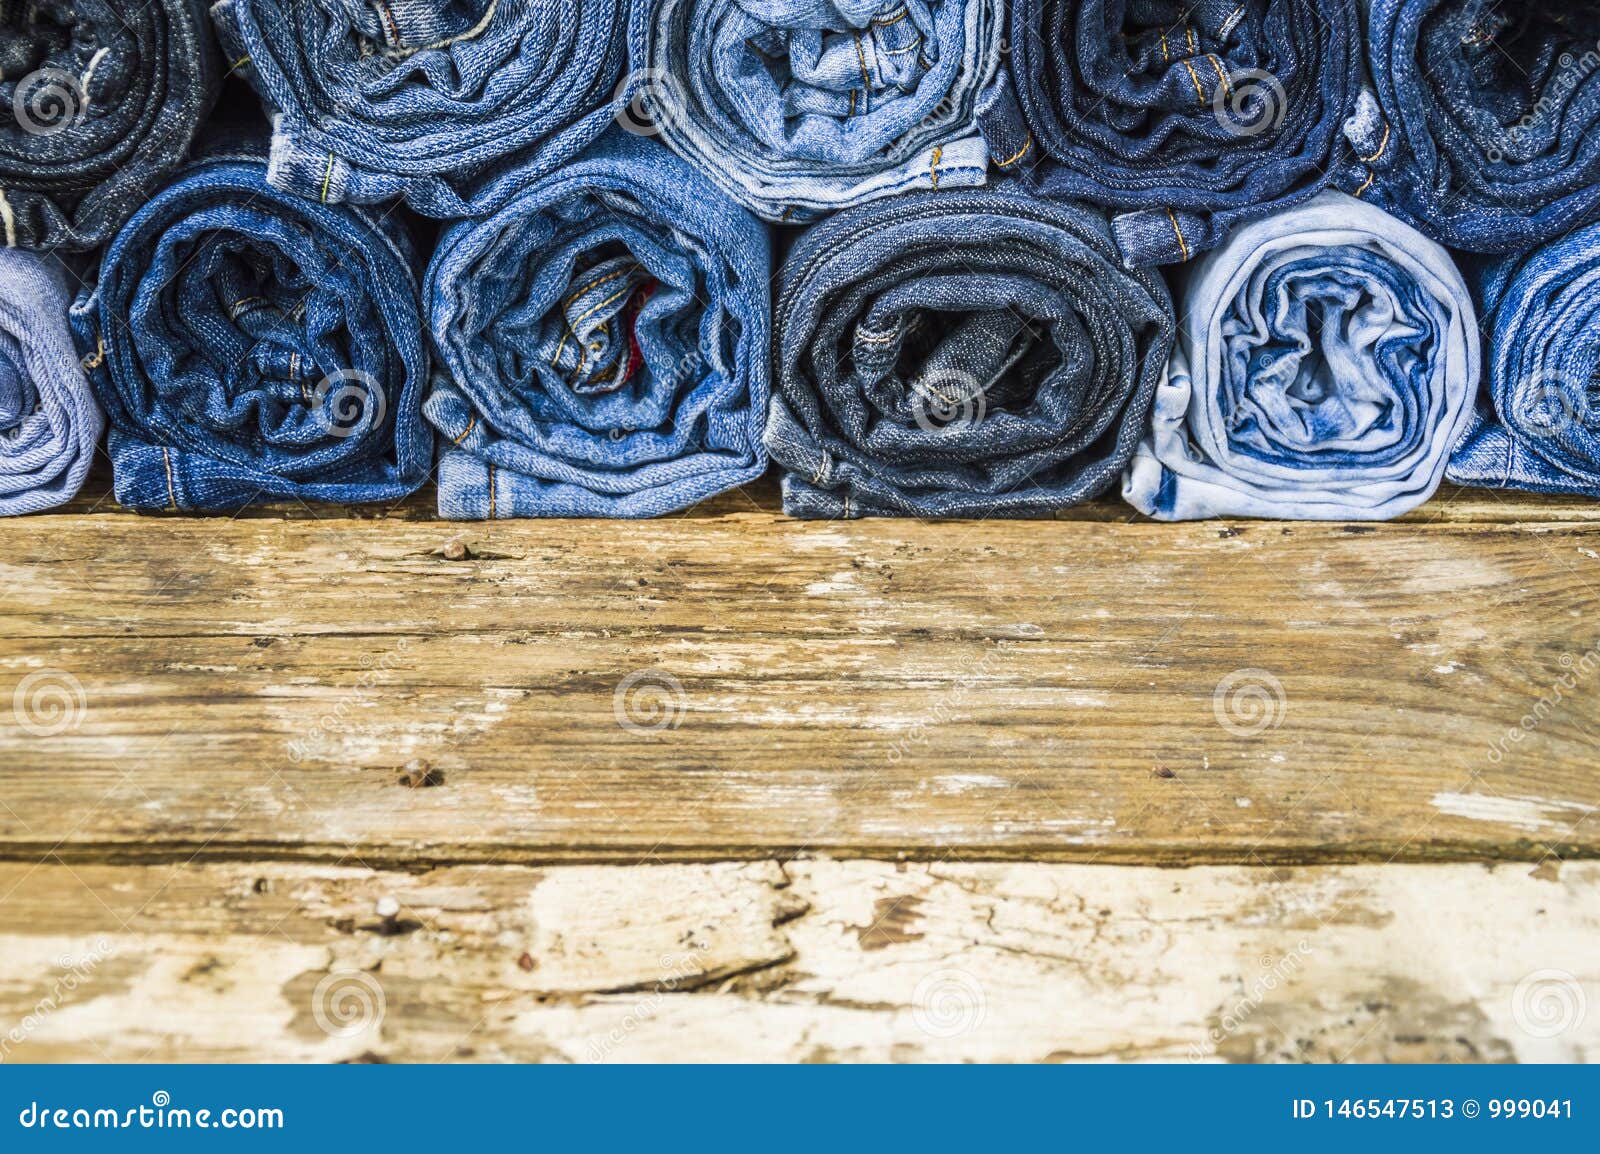 Gins, Denim of Different Blue Shades. Stock Image - Image of trousers ...